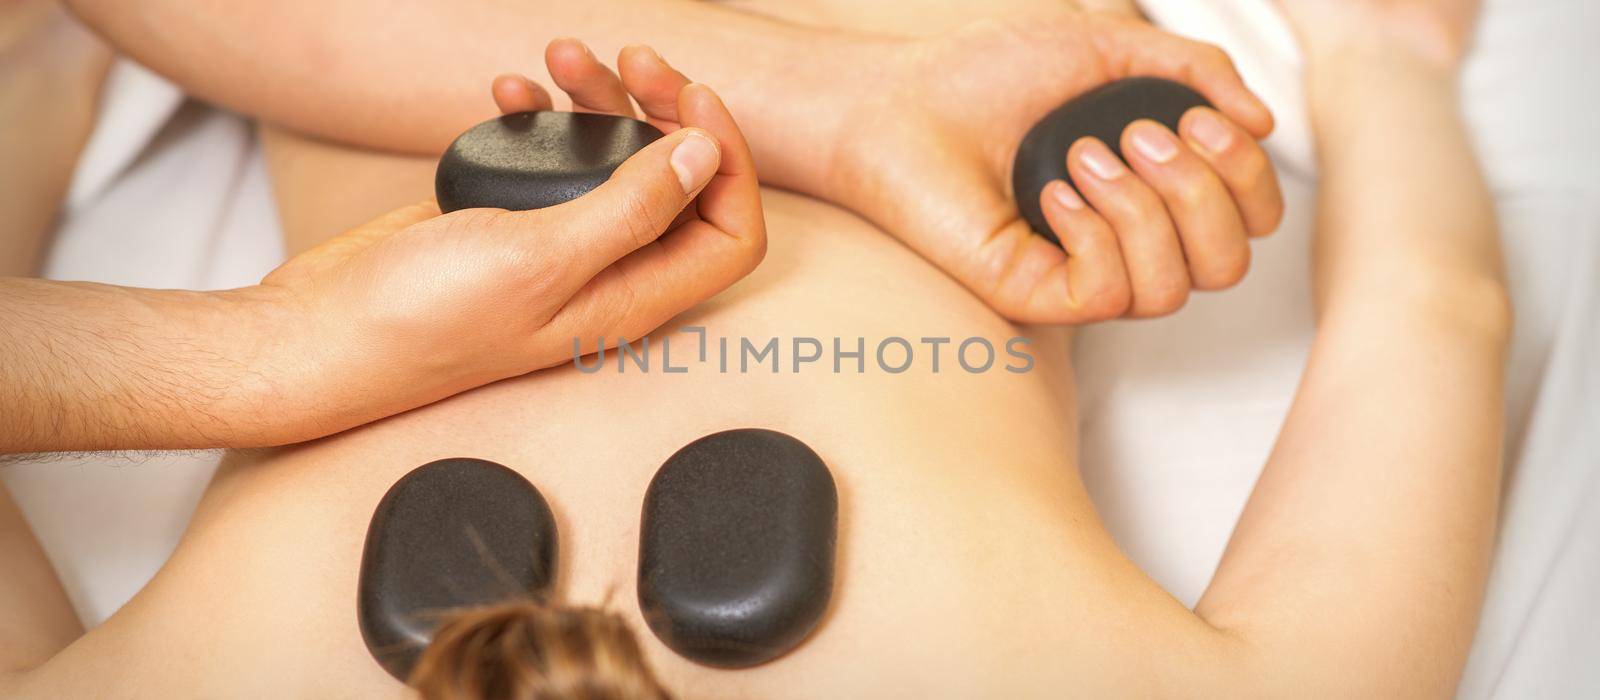 Hot stone massage on the female back with hands of masseur holding black massage stones in spa salon